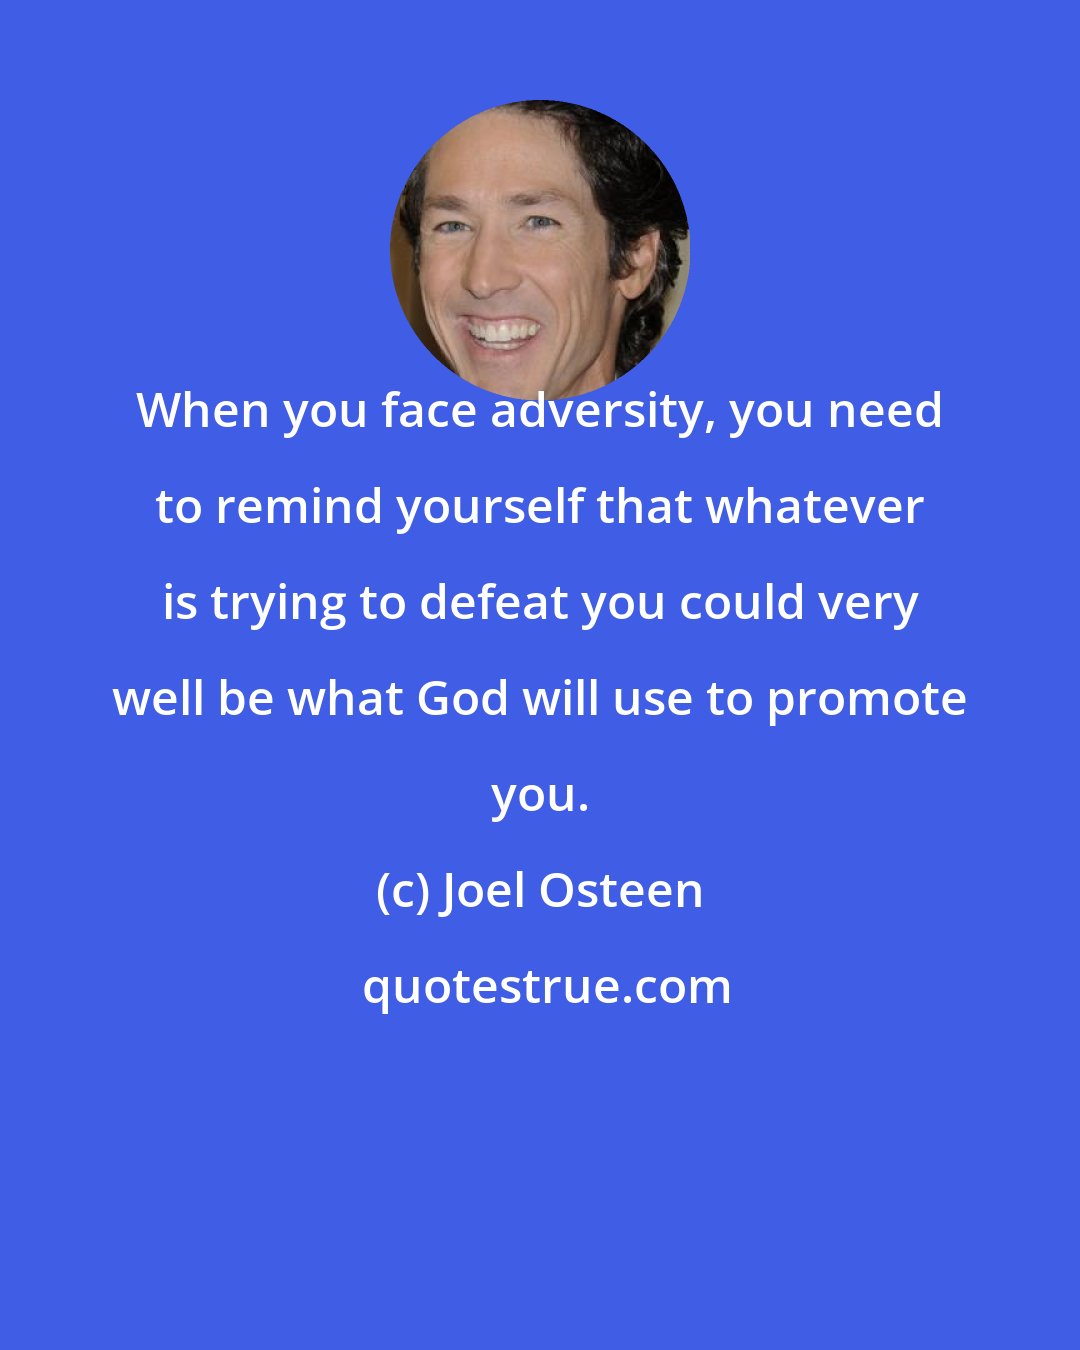 Joel Osteen: When you face adversity, you need to remind yourself that whatever is trying to defeat you could very well be what God will use to promote you.